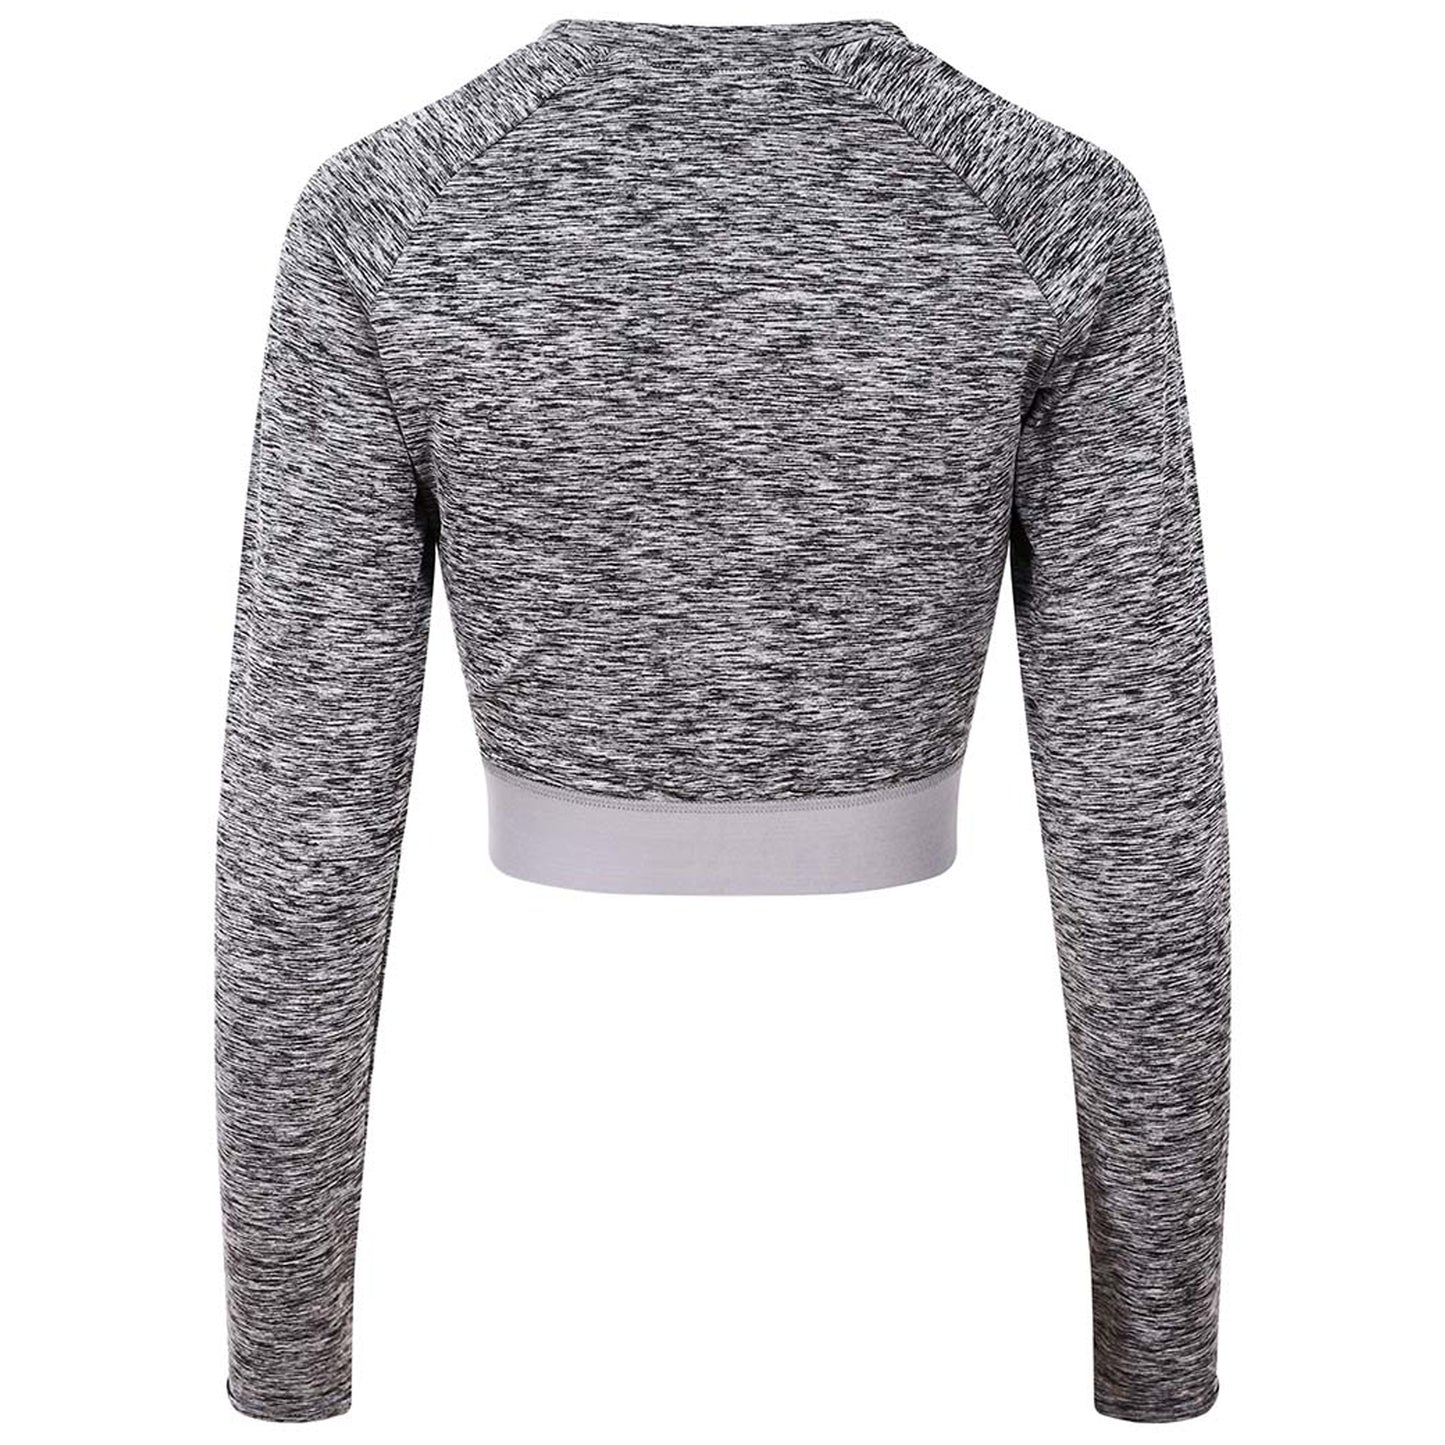 LUCY - "Cool" Technology Long Sleeved Crop Top - Grey